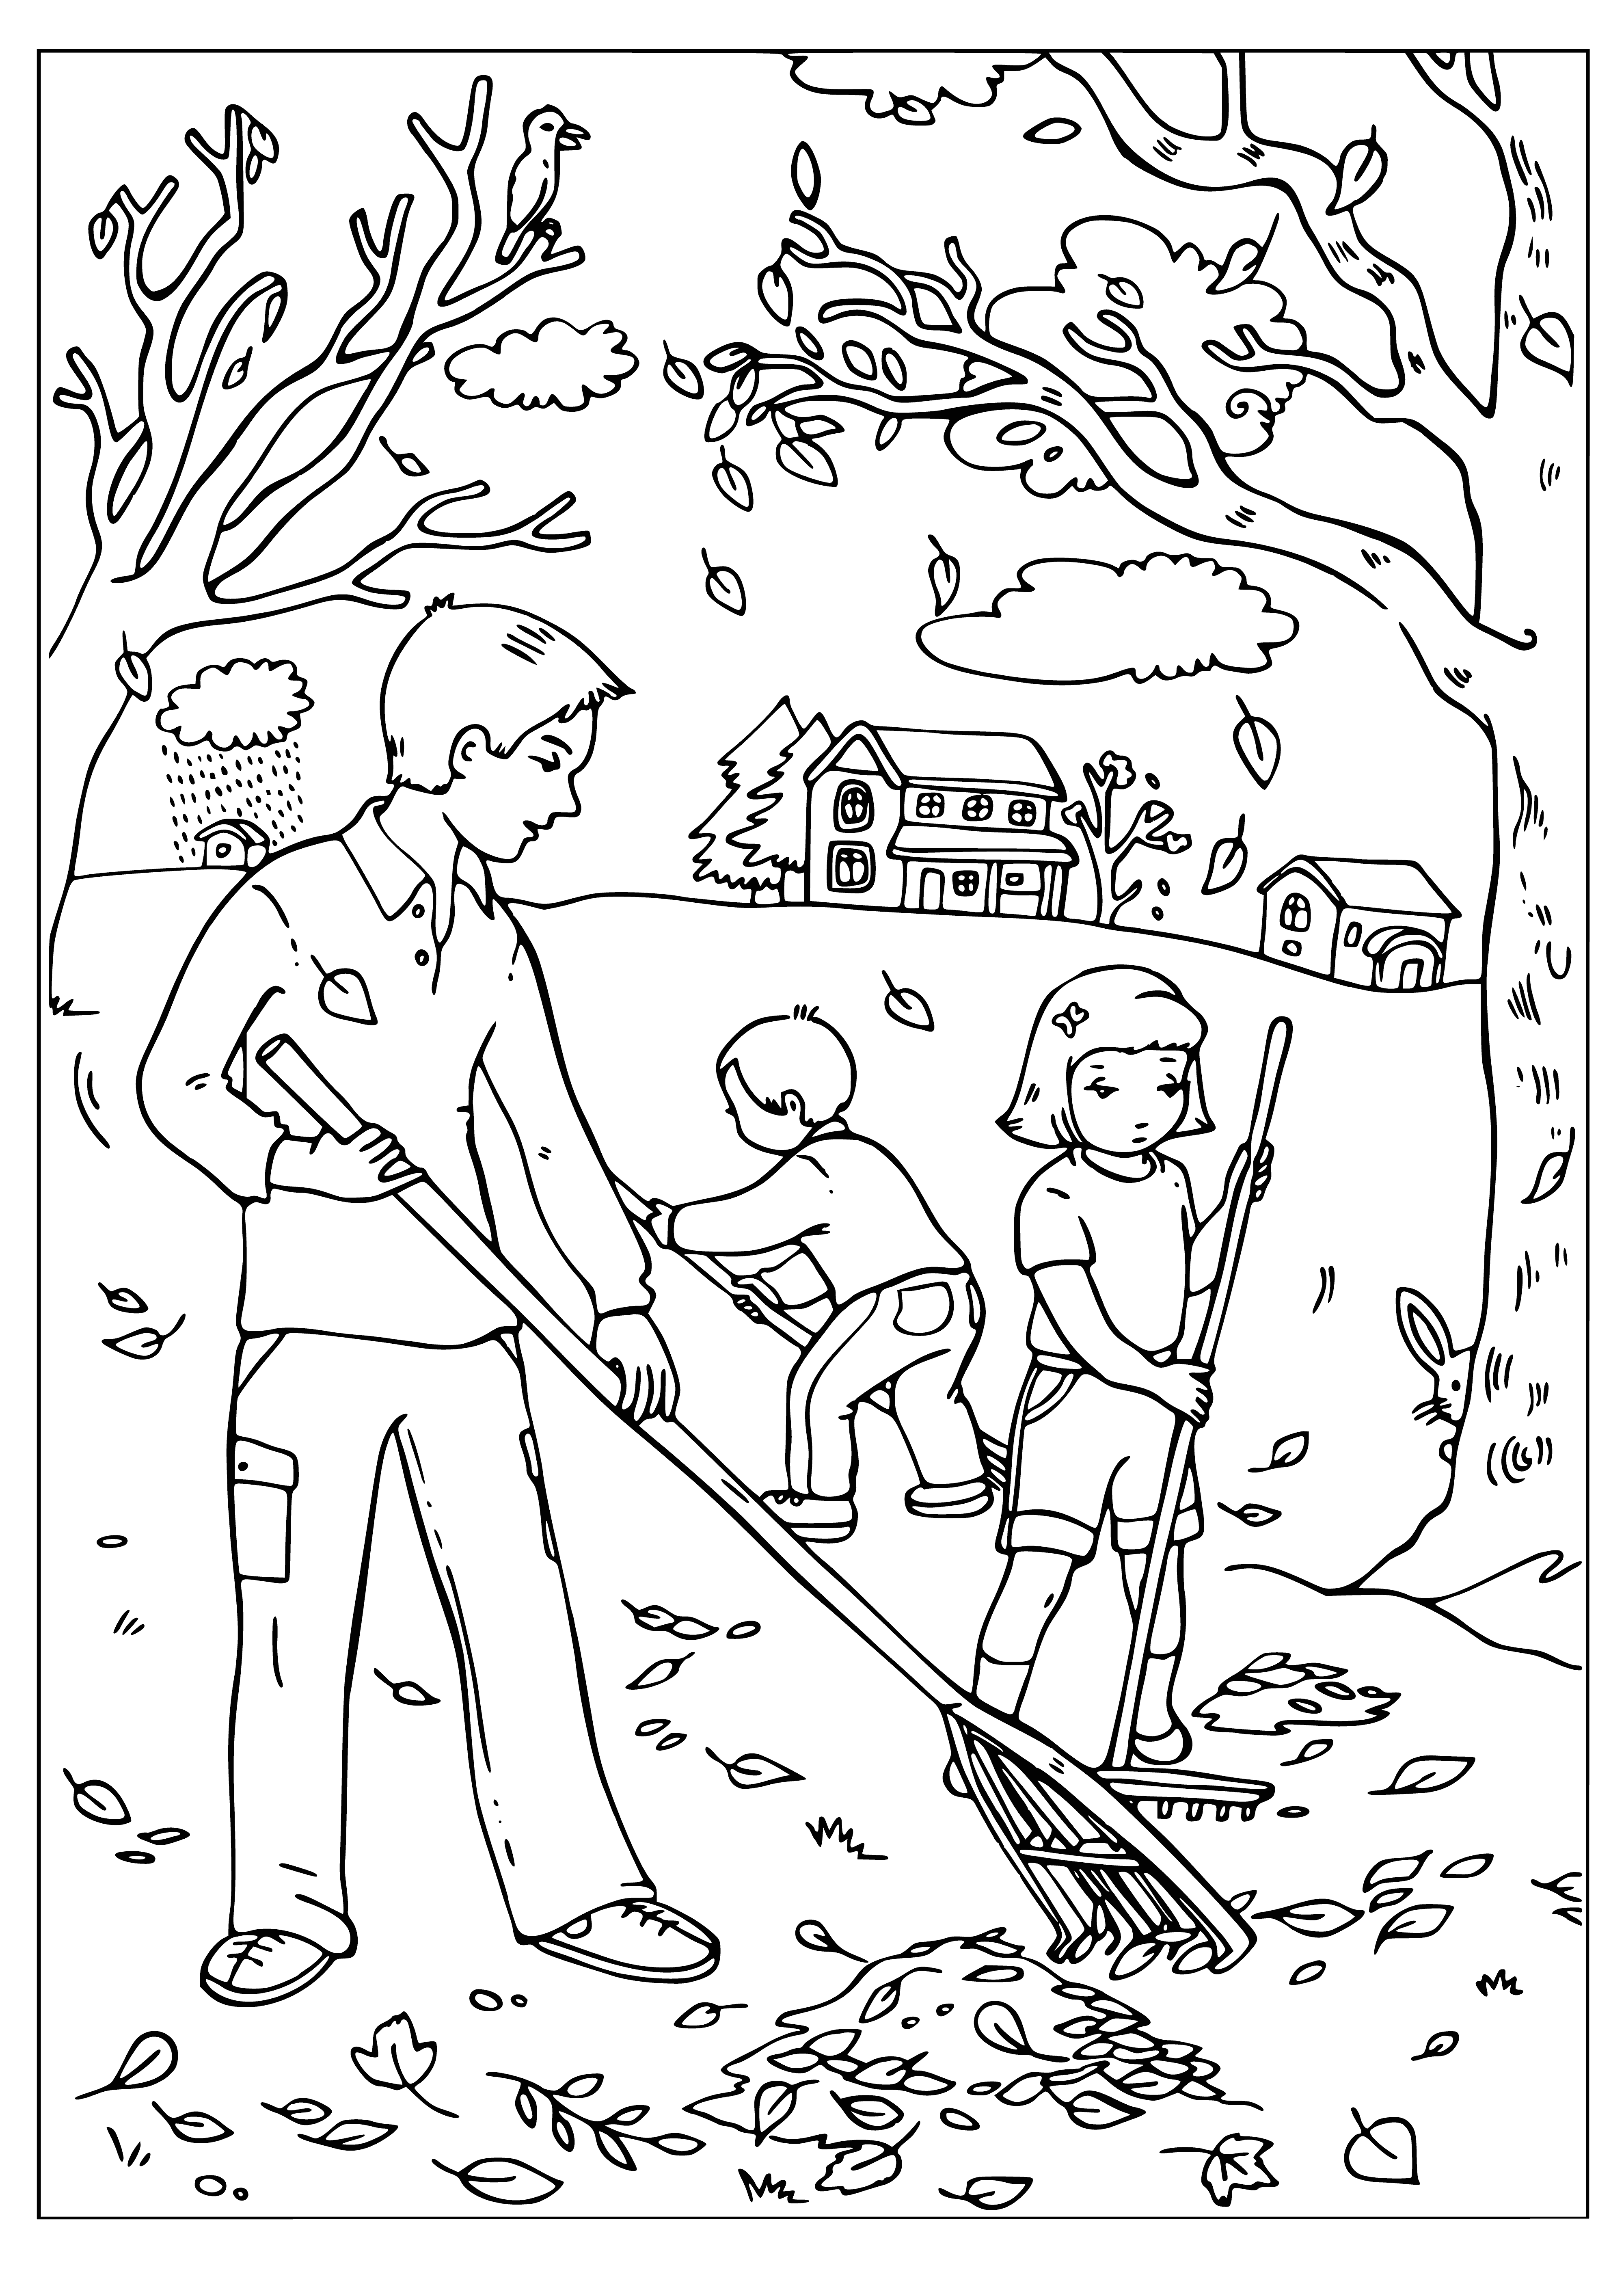 Harvesting leaves coloring page